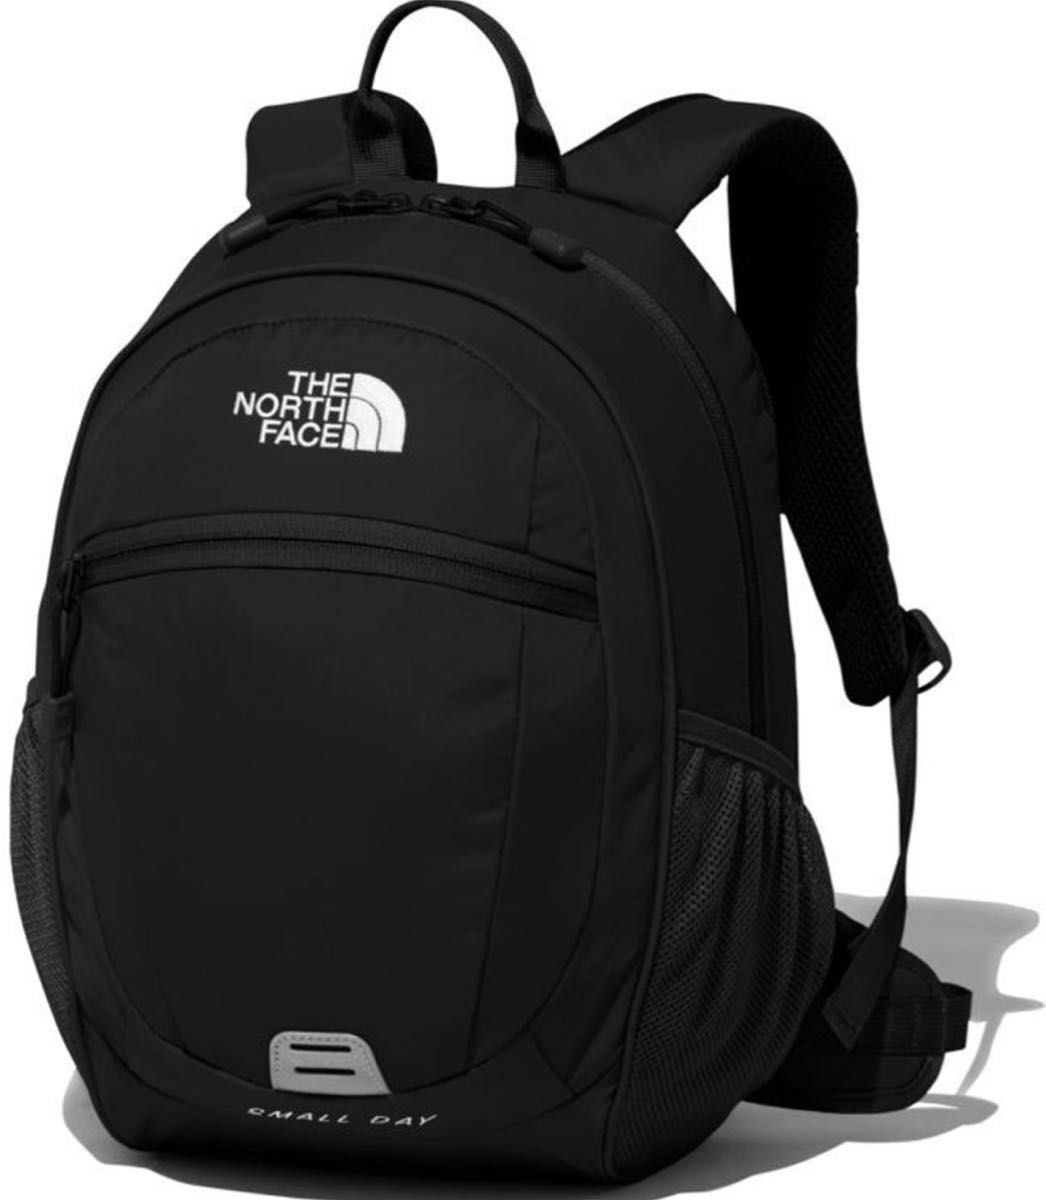 THE NORTH FACE Small Day NMJ72360 Yahoo!フリマ（旧）